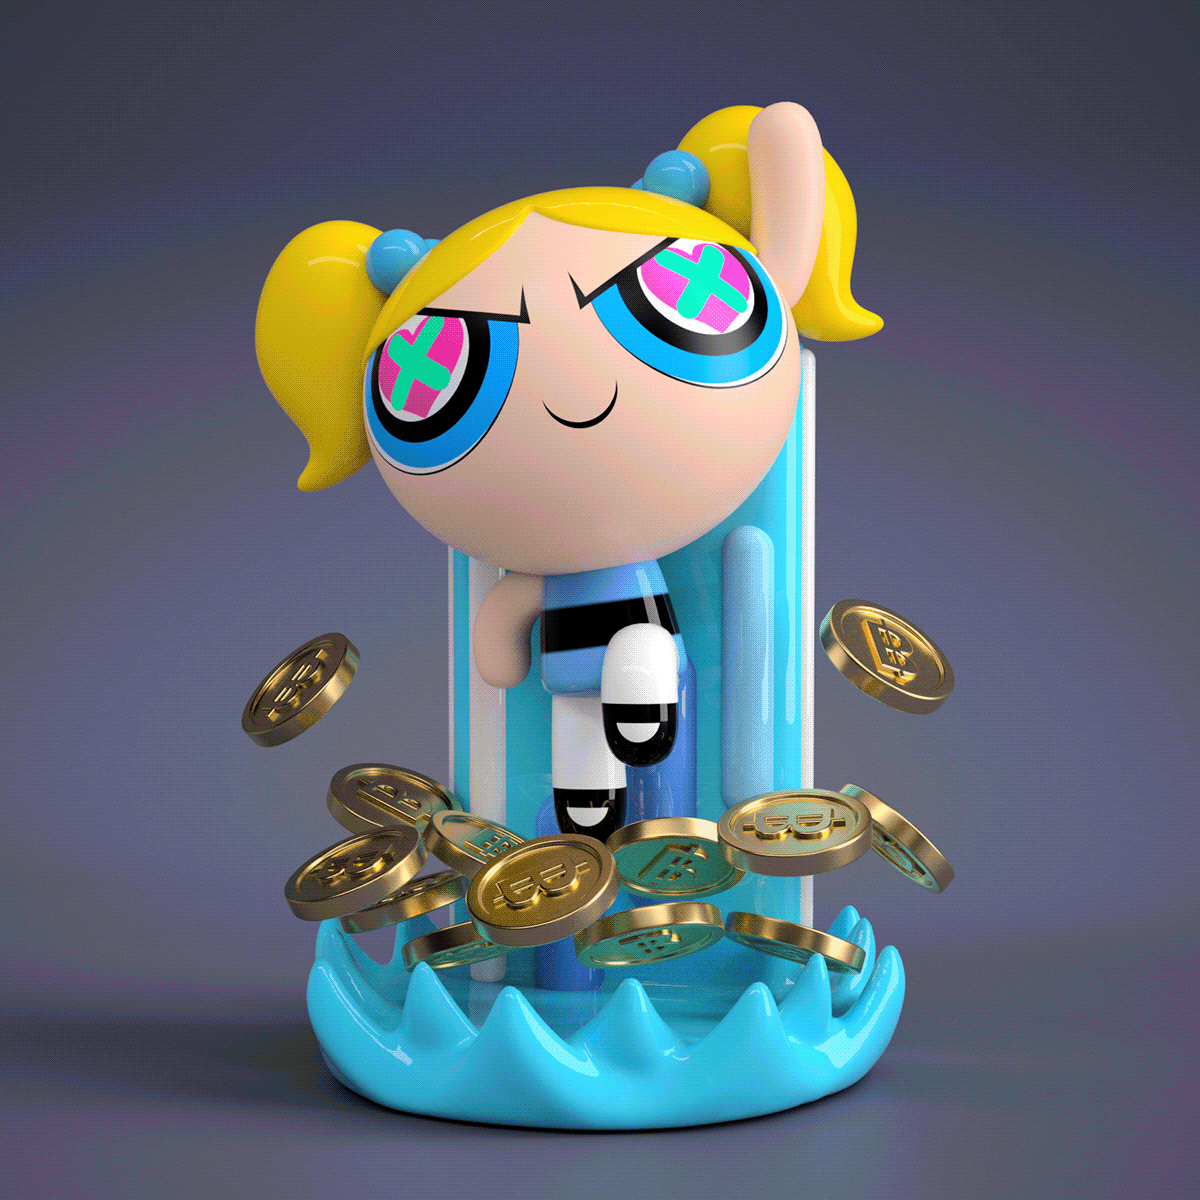 3D 3dmodeling arttoy bitcoin c4d cgiart Character popart powerpuffgirls toy